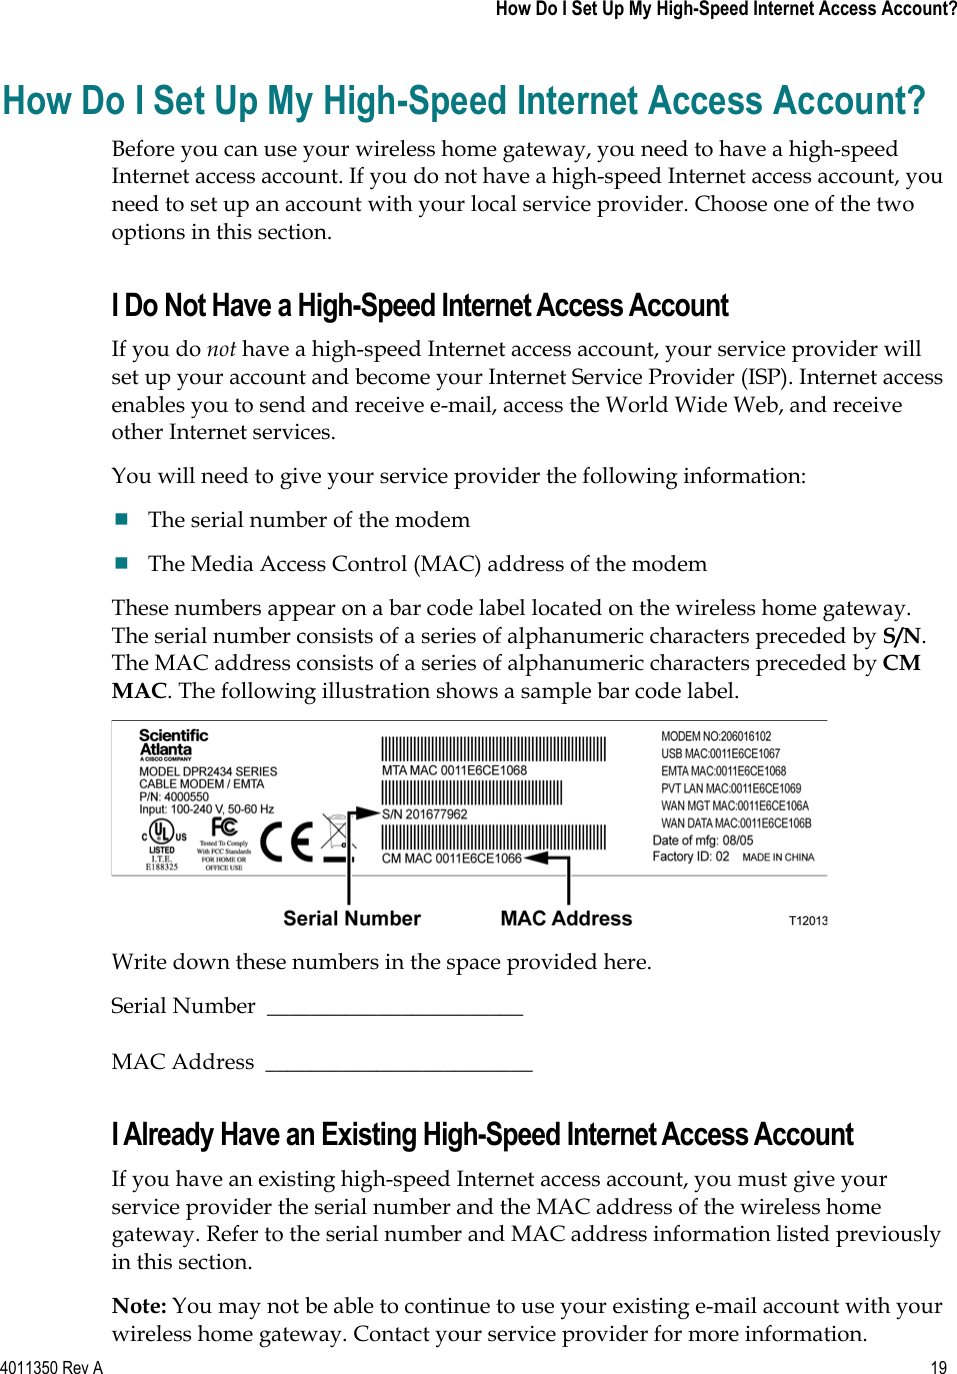 4011350 Rev A    19   How Do I Set Up My High-Speed Internet Access Account?How Do I Set Up My High-Speed Internet Access Account? Before you can use your wireless home gateway, you need to have a high-speed Internet access account. If you do not have a high-speed Internet access account, you need to set up an account with your local service provider. Choose one of the two options in this section. I Do Not Have a High-Speed Internet Access Account If you do not have a high-speed Internet access account, your service provider will set up your account and become your Internet Service Provider (ISP). Internet access enables you to send and receive e-mail, access the World Wide Web, and receive other Internet services.You will need to give your service provider the following information: The serial number of the modem The Media Access Control (MAC) address of the modem These numbers appear on a bar code label located on the wireless home gateway. The serial number consists of a series of alphanumeric characters preceded by S/N.The MAC address consists of a series of alphanumeric characters preceded by CMMAC. The following illustration shows a sample bar code label. Write down these numbers in the space provided here. Serial Number  _______________________   MAC Address  ________________________ I Already Have an Existing High-Speed Internet Access Account If you have an existing high-speed Internet access account, you must give your service provider the serial number and the MAC address of the wireless home gateway. Refer to the serial number and MAC address information listed previously in this section. Note: You may not be able to continue to use your existing e-mail account with your wireless home gateway. Contact your service provider for more information. 